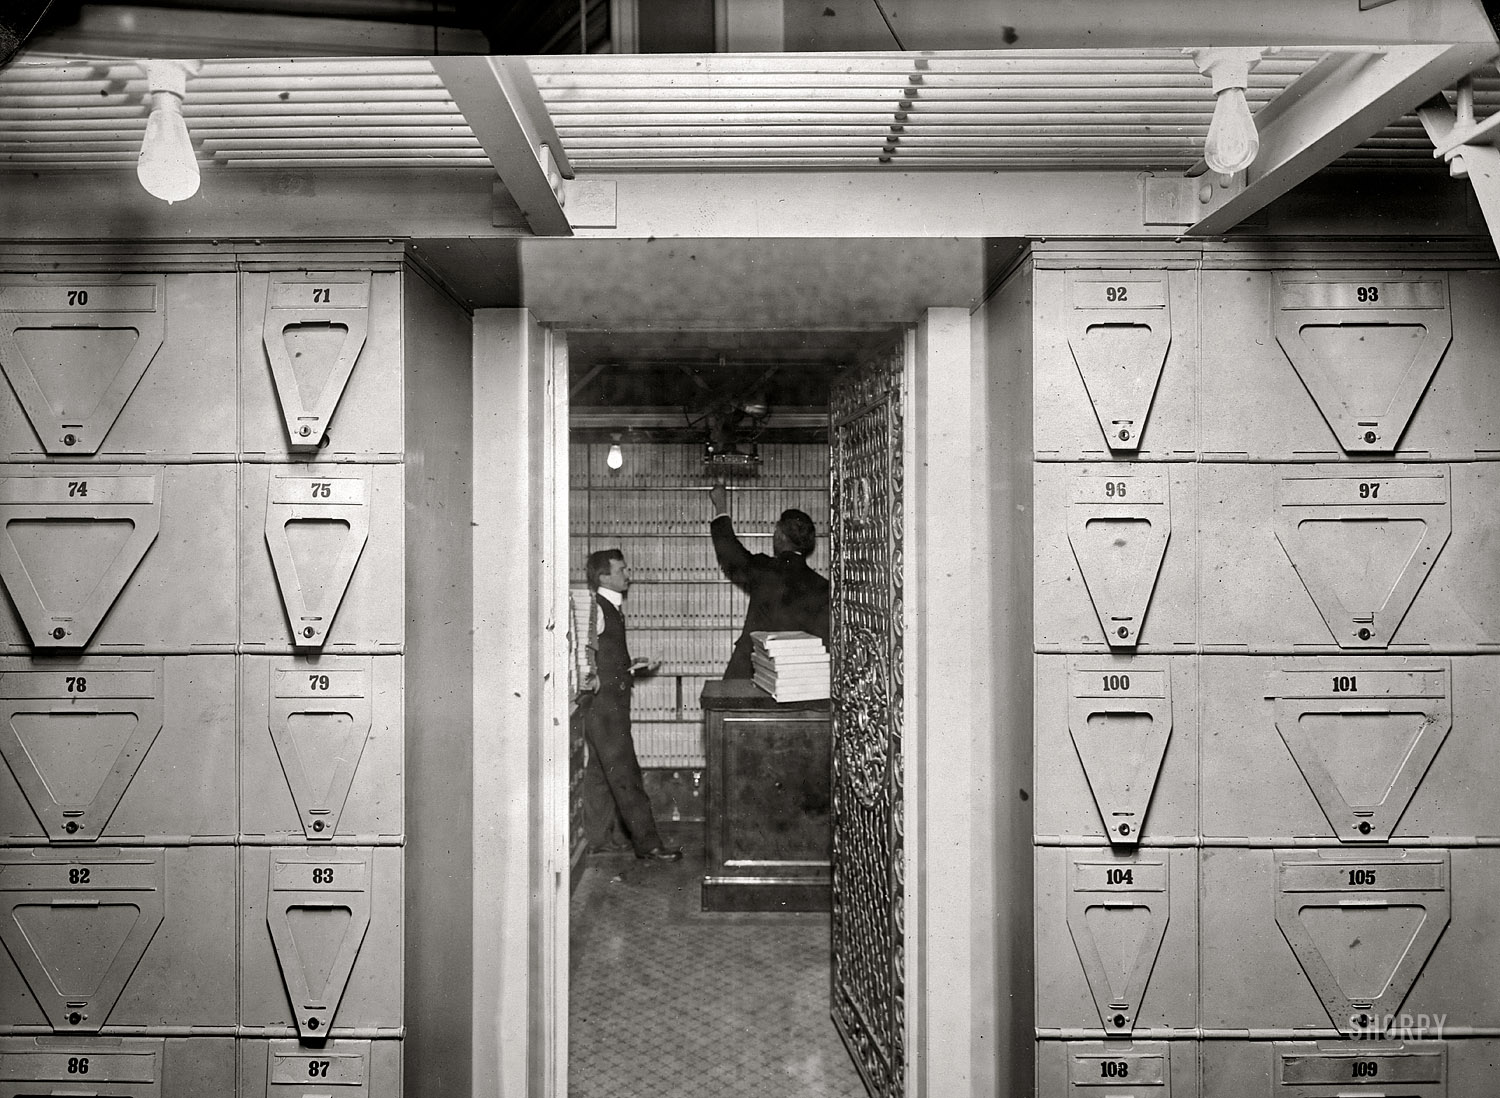 1914. "Treasury Department, Office of Comptroller of Currency -- bond vault. Contains bonds to the value of $900 million securing government deposits and postal savings fund." National Photo Co. glass negative. View full size.